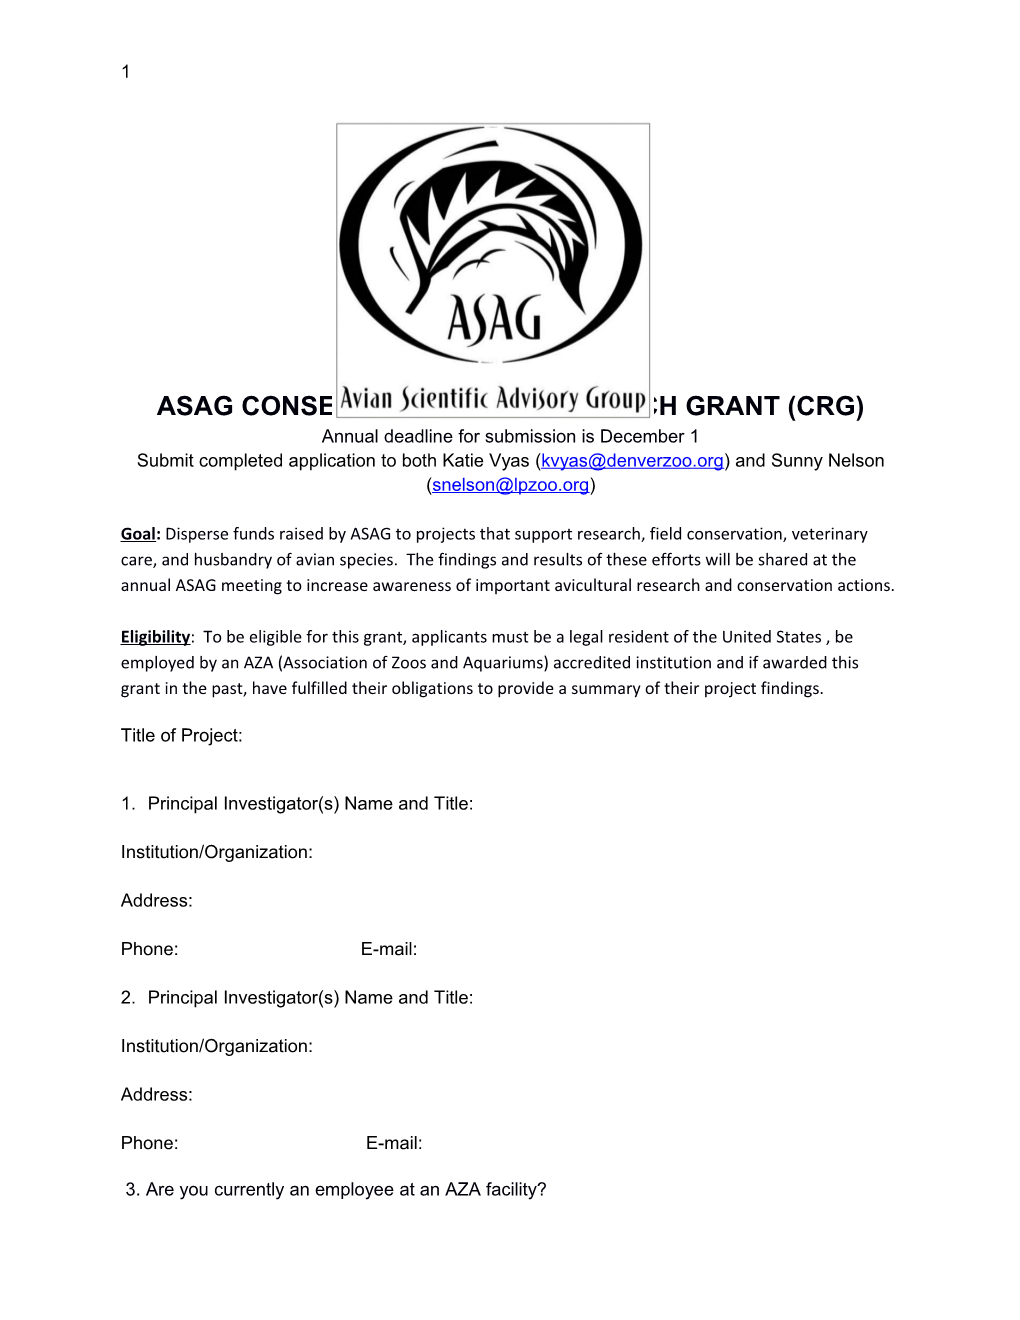 Asag Conservation and Research Grant (Crg)